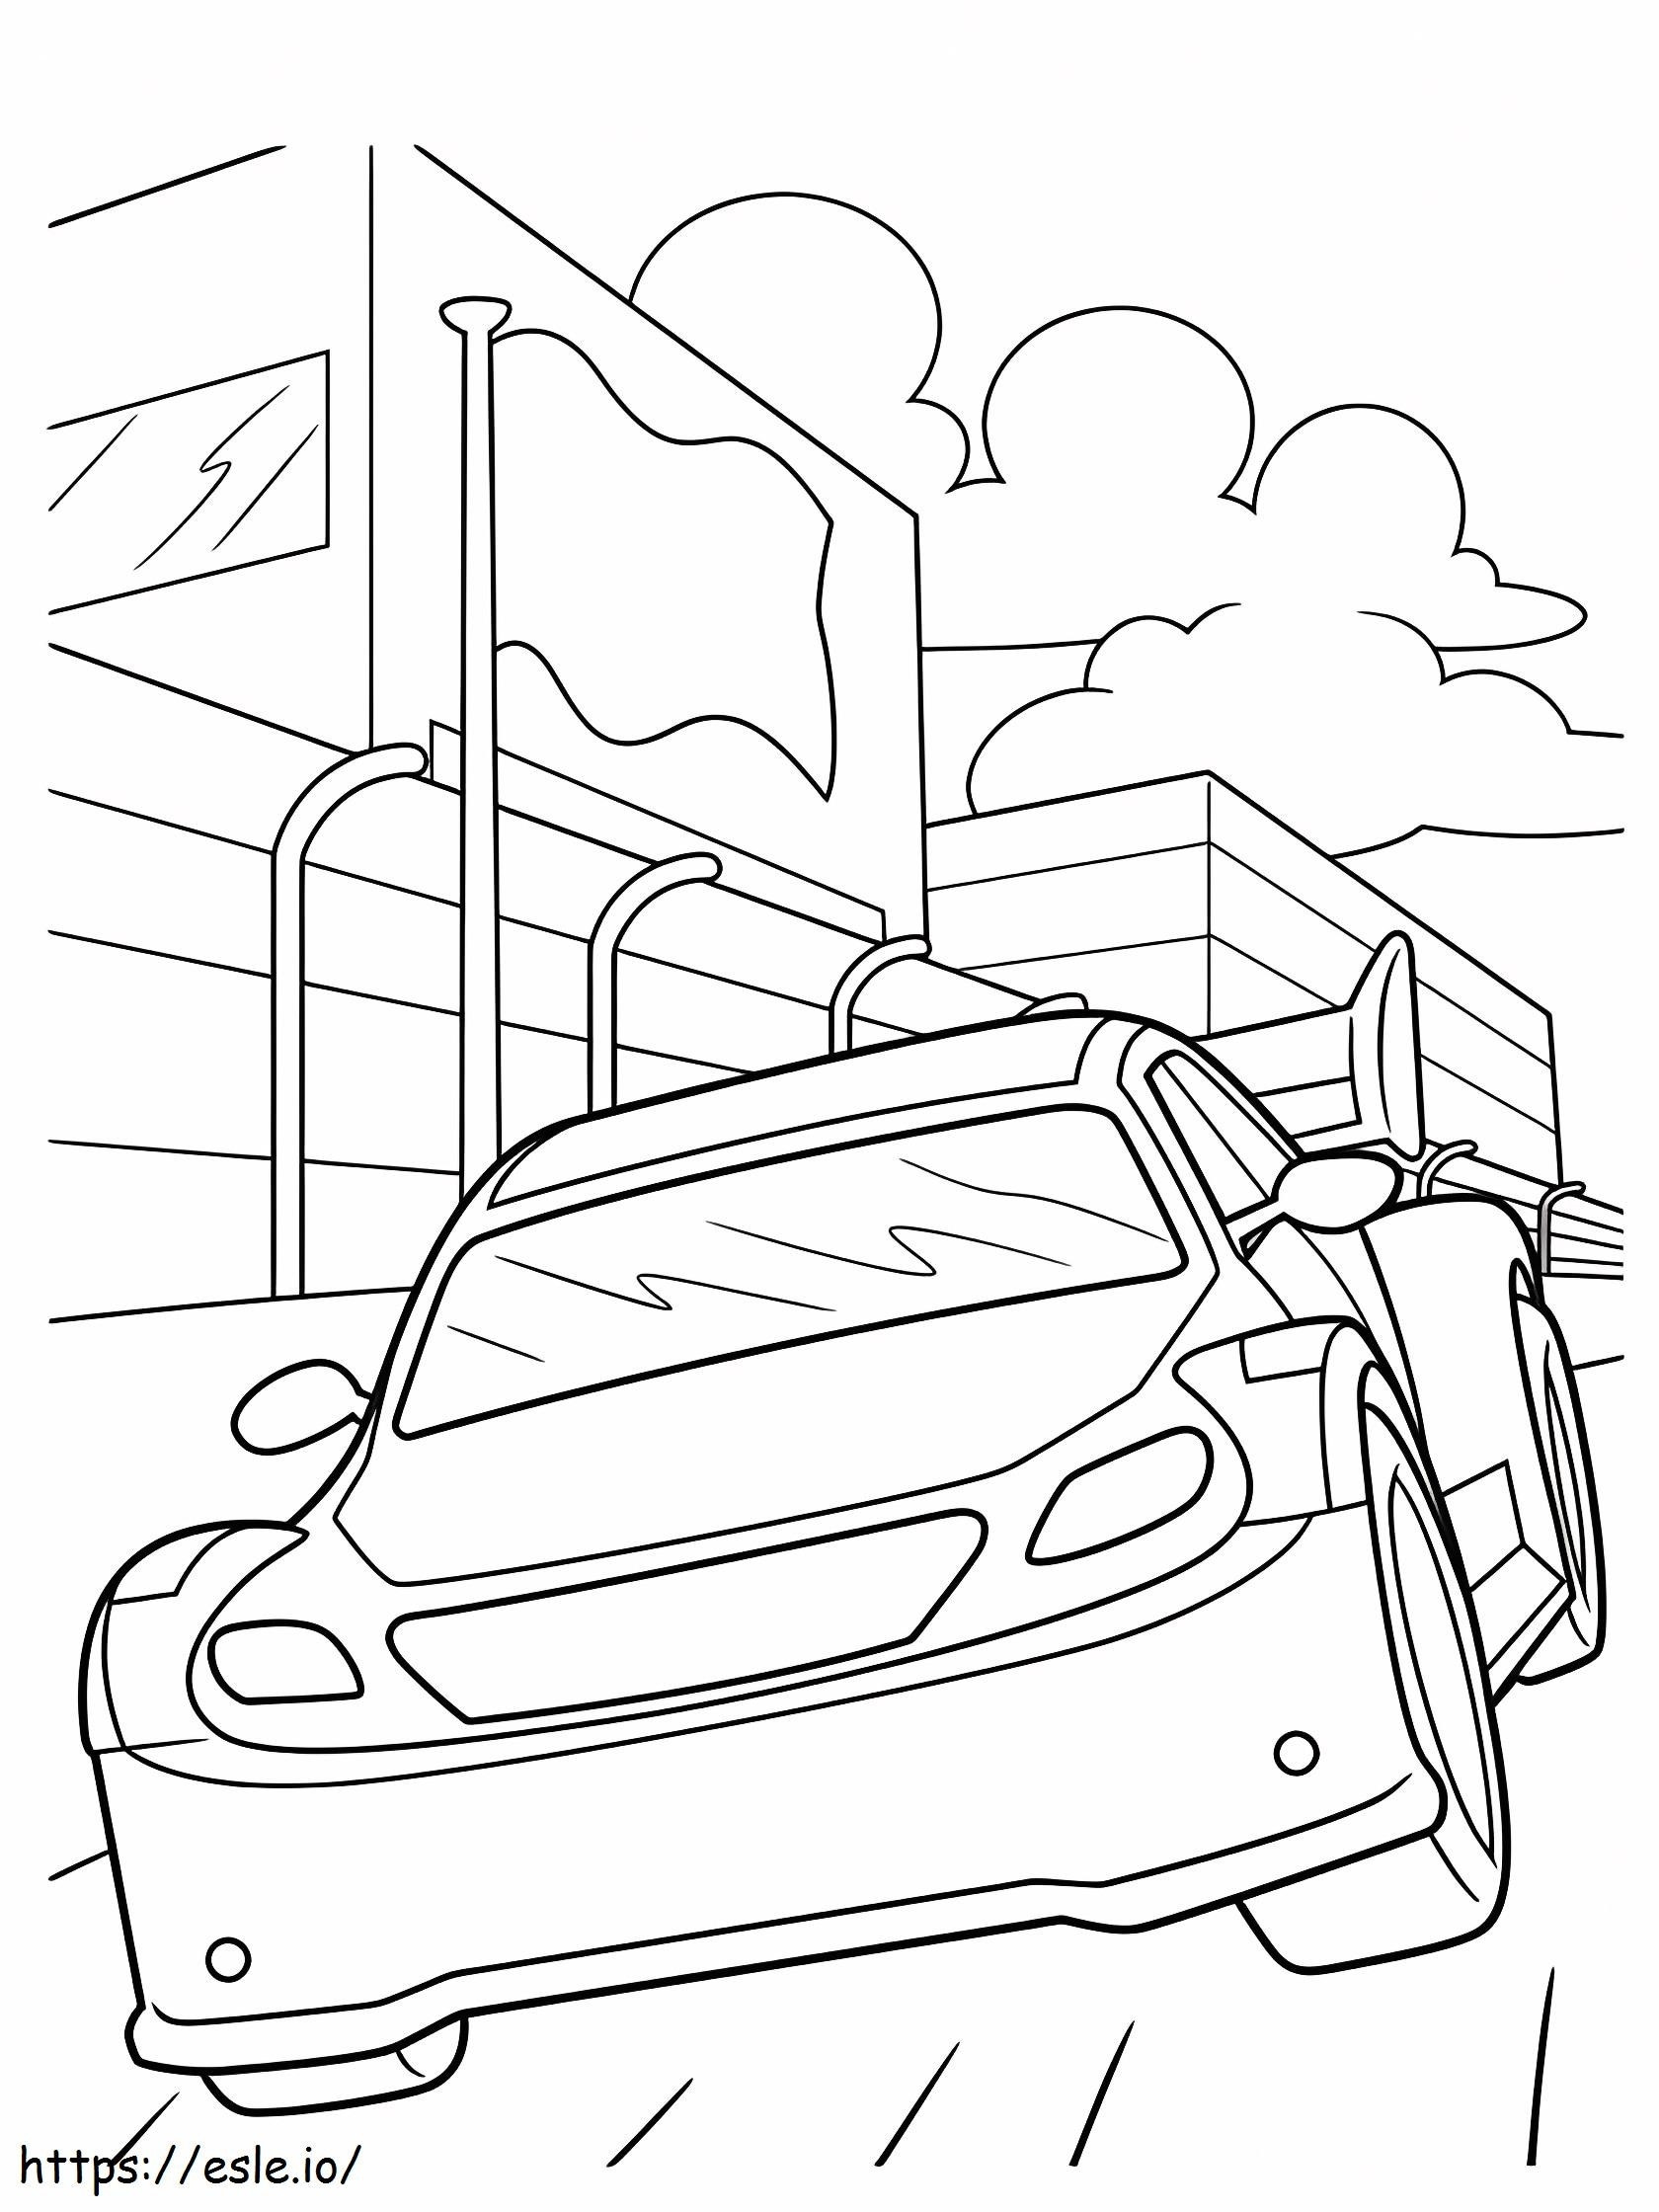 1527148865 37 Nascar coloring page